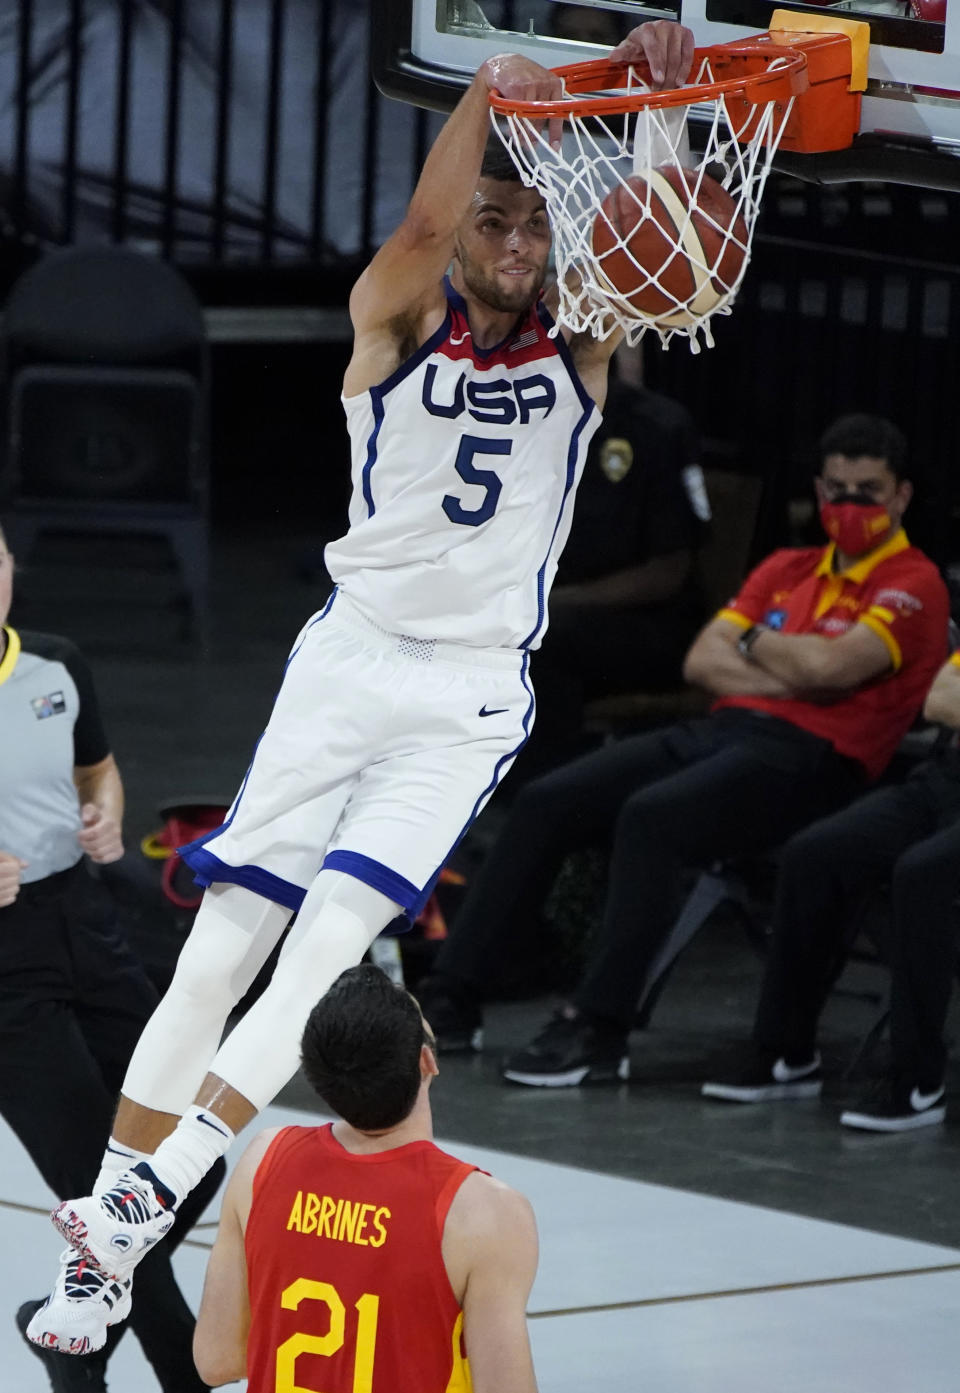 United States' Zach Lavine (5) dunks against Spain's Alex Abrines (21) during the second half of an exhibition basketball game in preparation for the Olympics, Sunday, July 18, 2021, in Las Vegas. (AP Photo/John Locher)